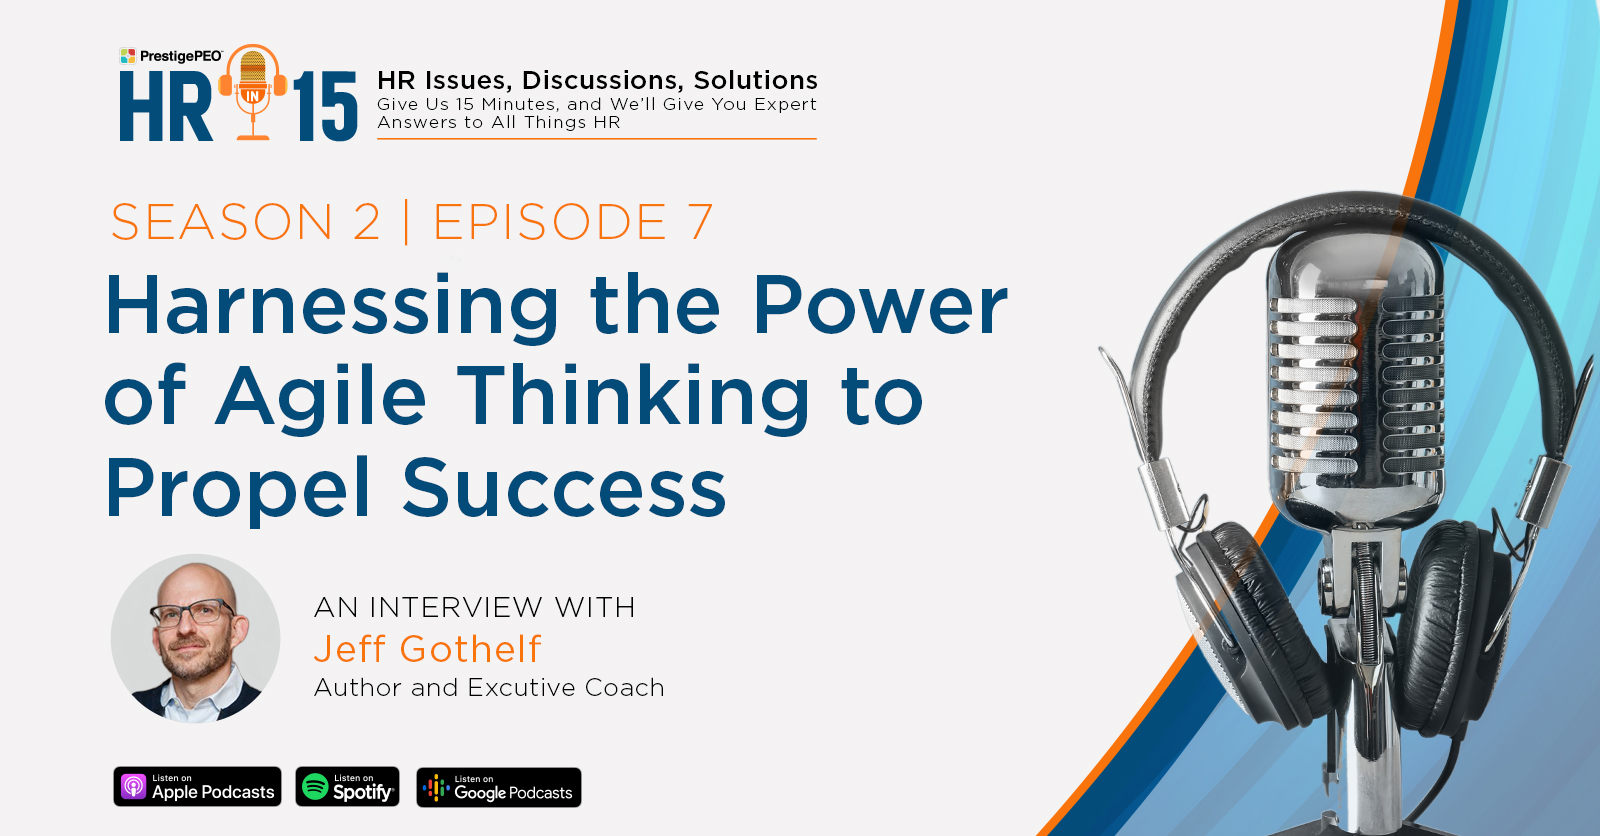 HR-in-15 Interview with Jeff Gothelf: Harnessing the power of agile thinking to propel success